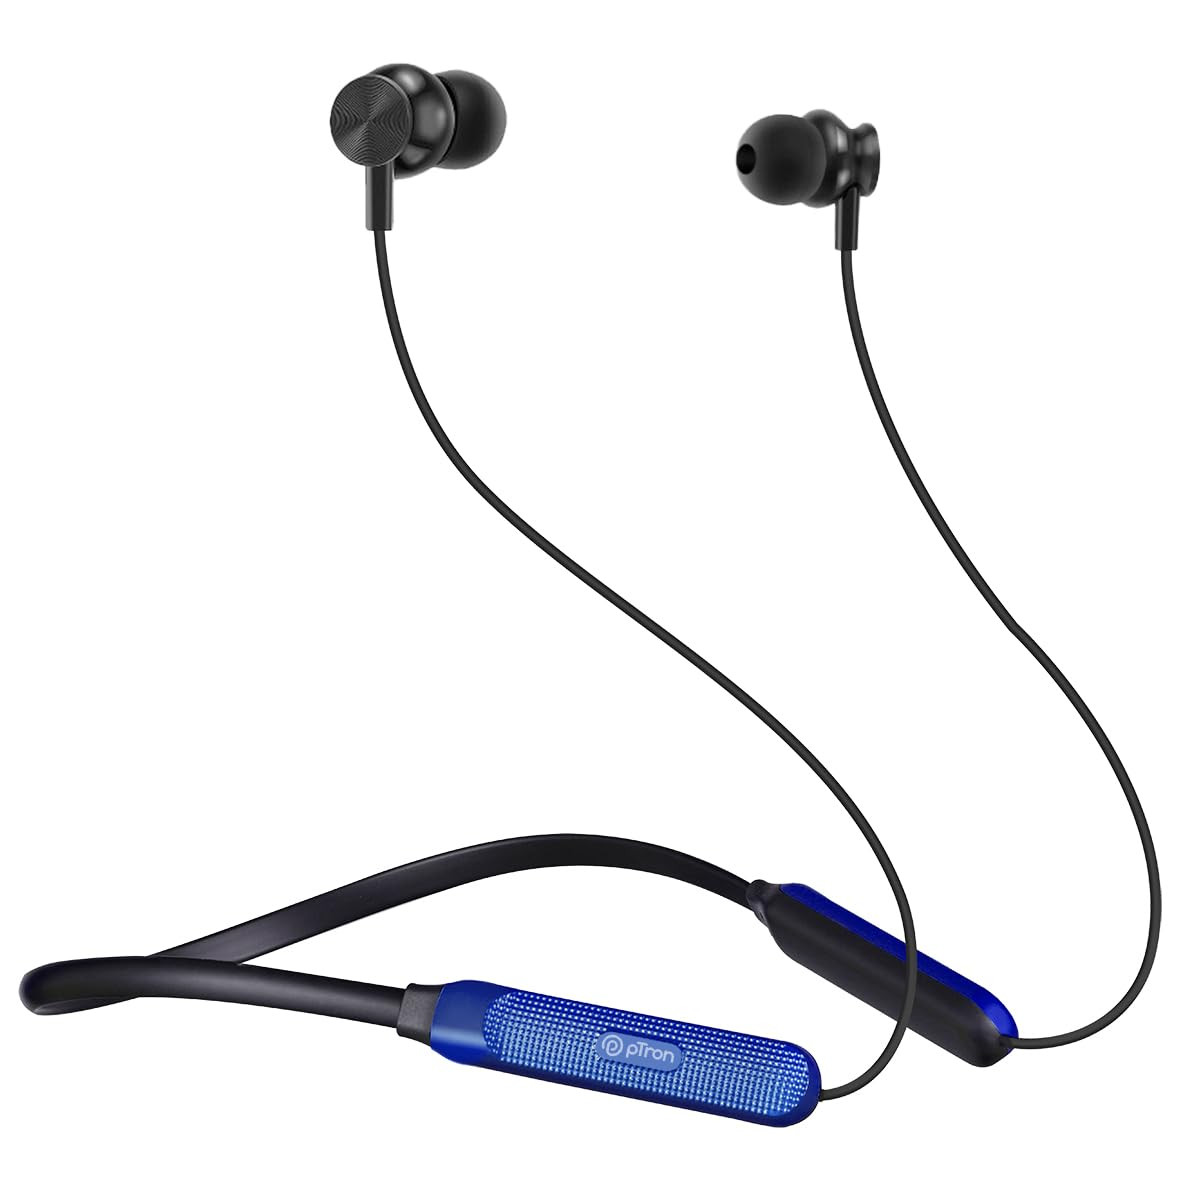 pTron Tangent Duo Bluetooth 52 Wireless in Ear Headphones 13mm Driver Deep Bass HD Calls Fast Charging Type-C Neckband Dual Pairing Voice Assistant  IPX4 Water Resistant BlackBlue